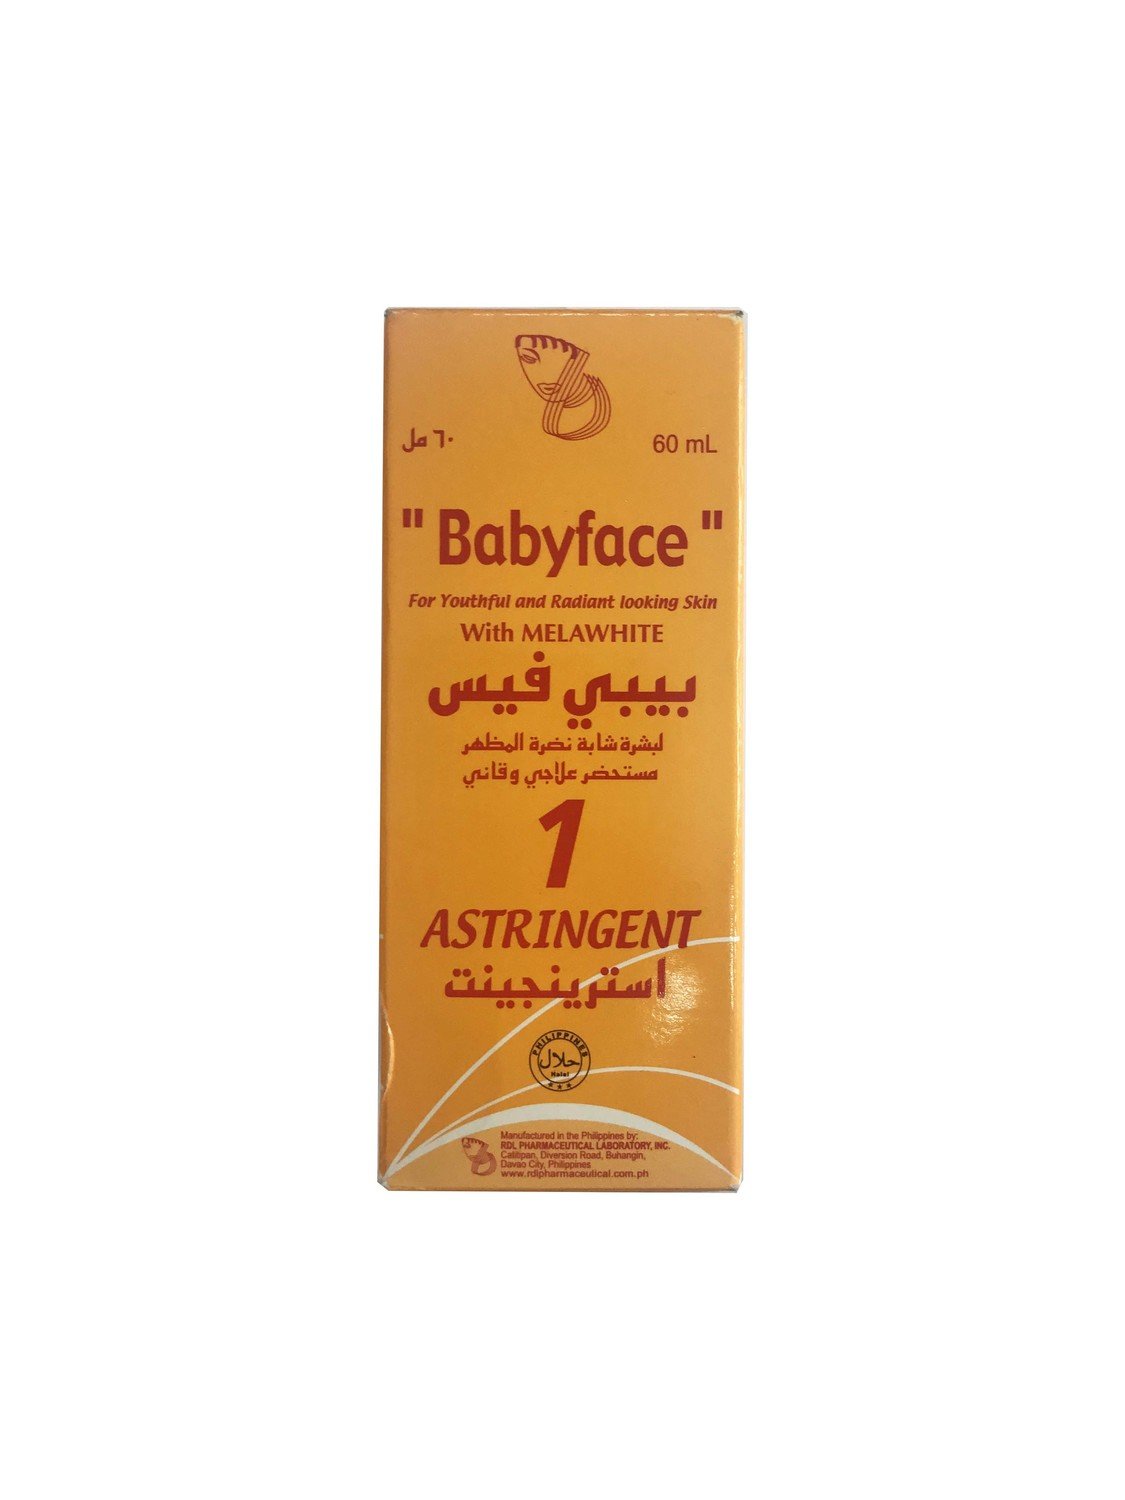 RDL 1: Baby Face with Melawhite Astringent 1 60ml